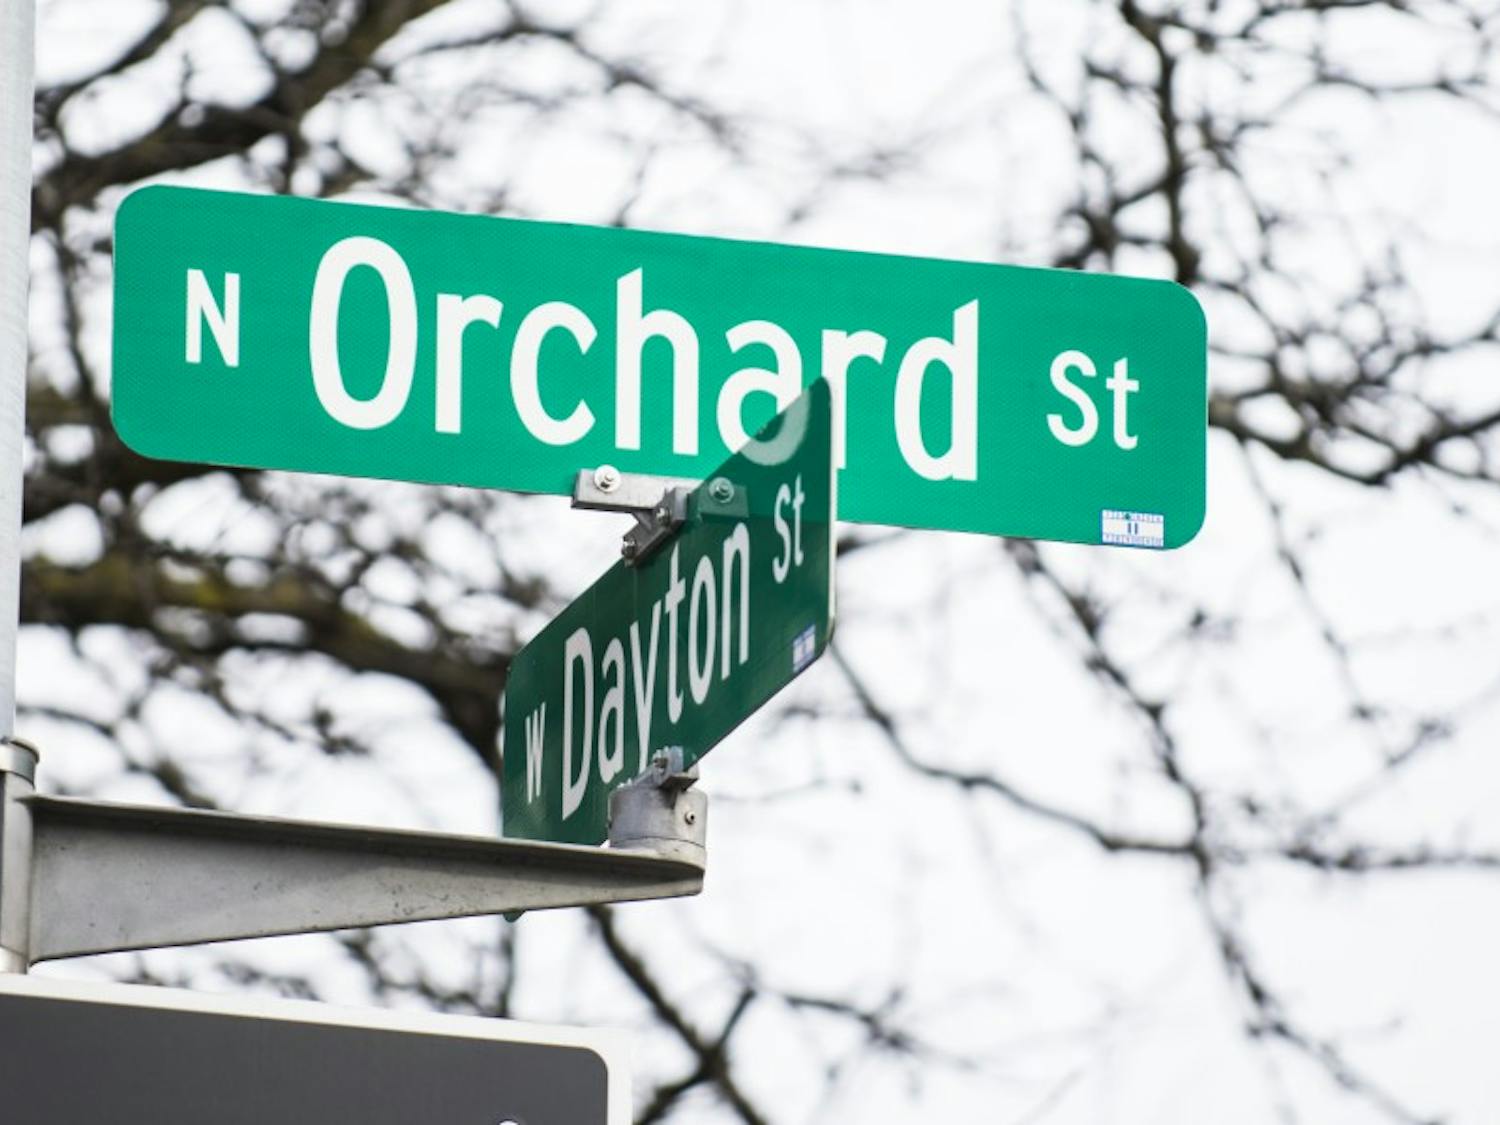 In an incident police believe was not “random,” two suspects allegedly entered a house on North Orchard Street and pointed handguns at the residents.